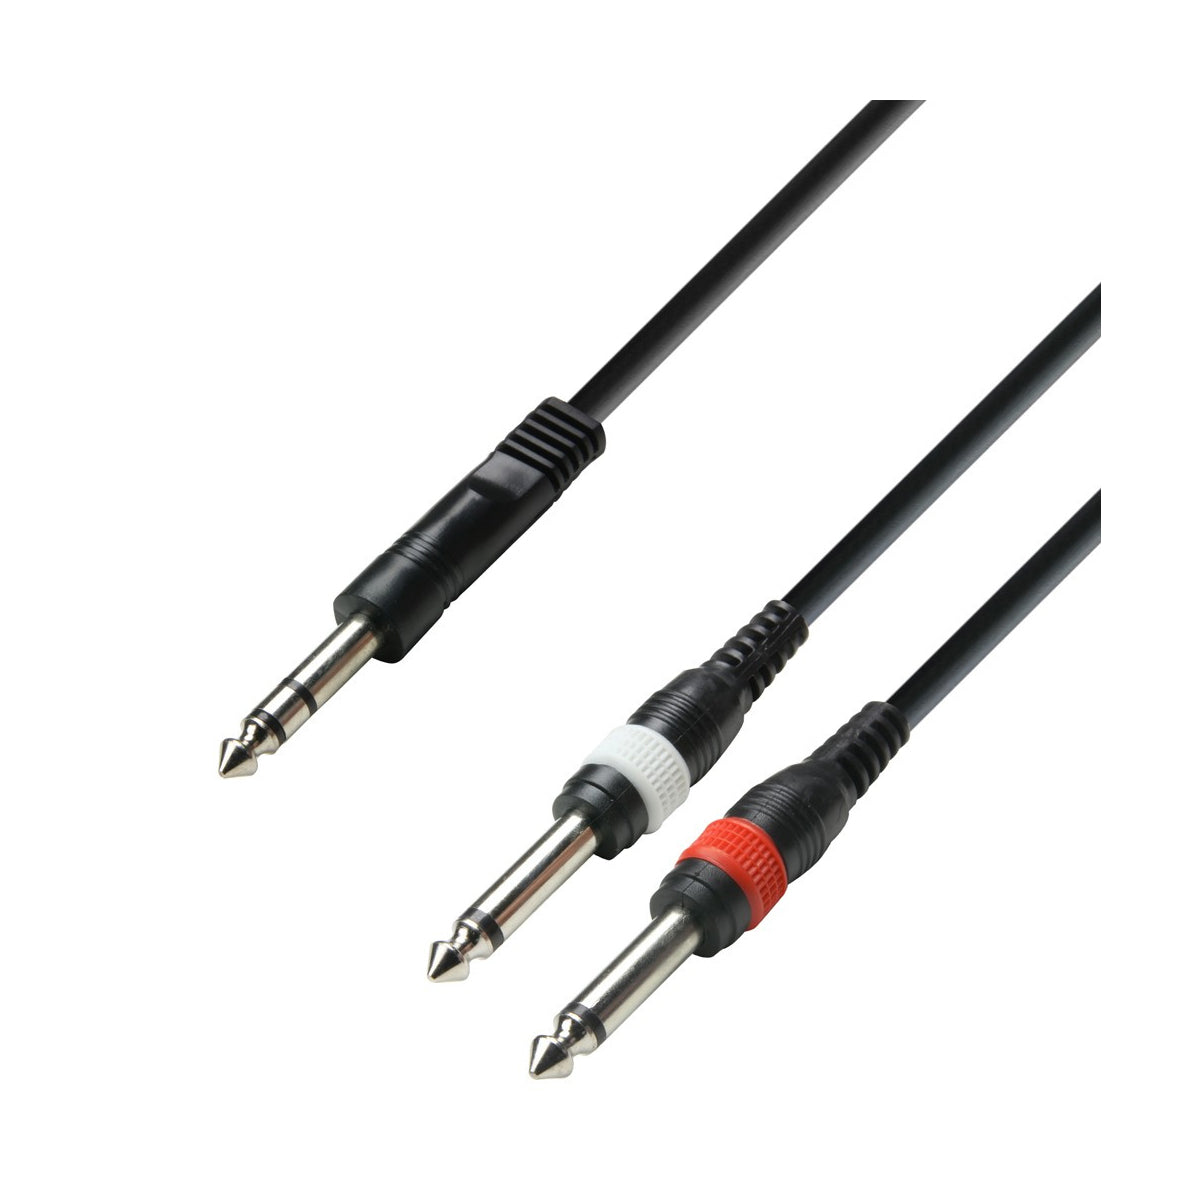 Adam Hall Cables K3 YVPP 0600 - Audio Cable 6.3mm Jack stereo to 2 x 6.3mm Jack mono 6m